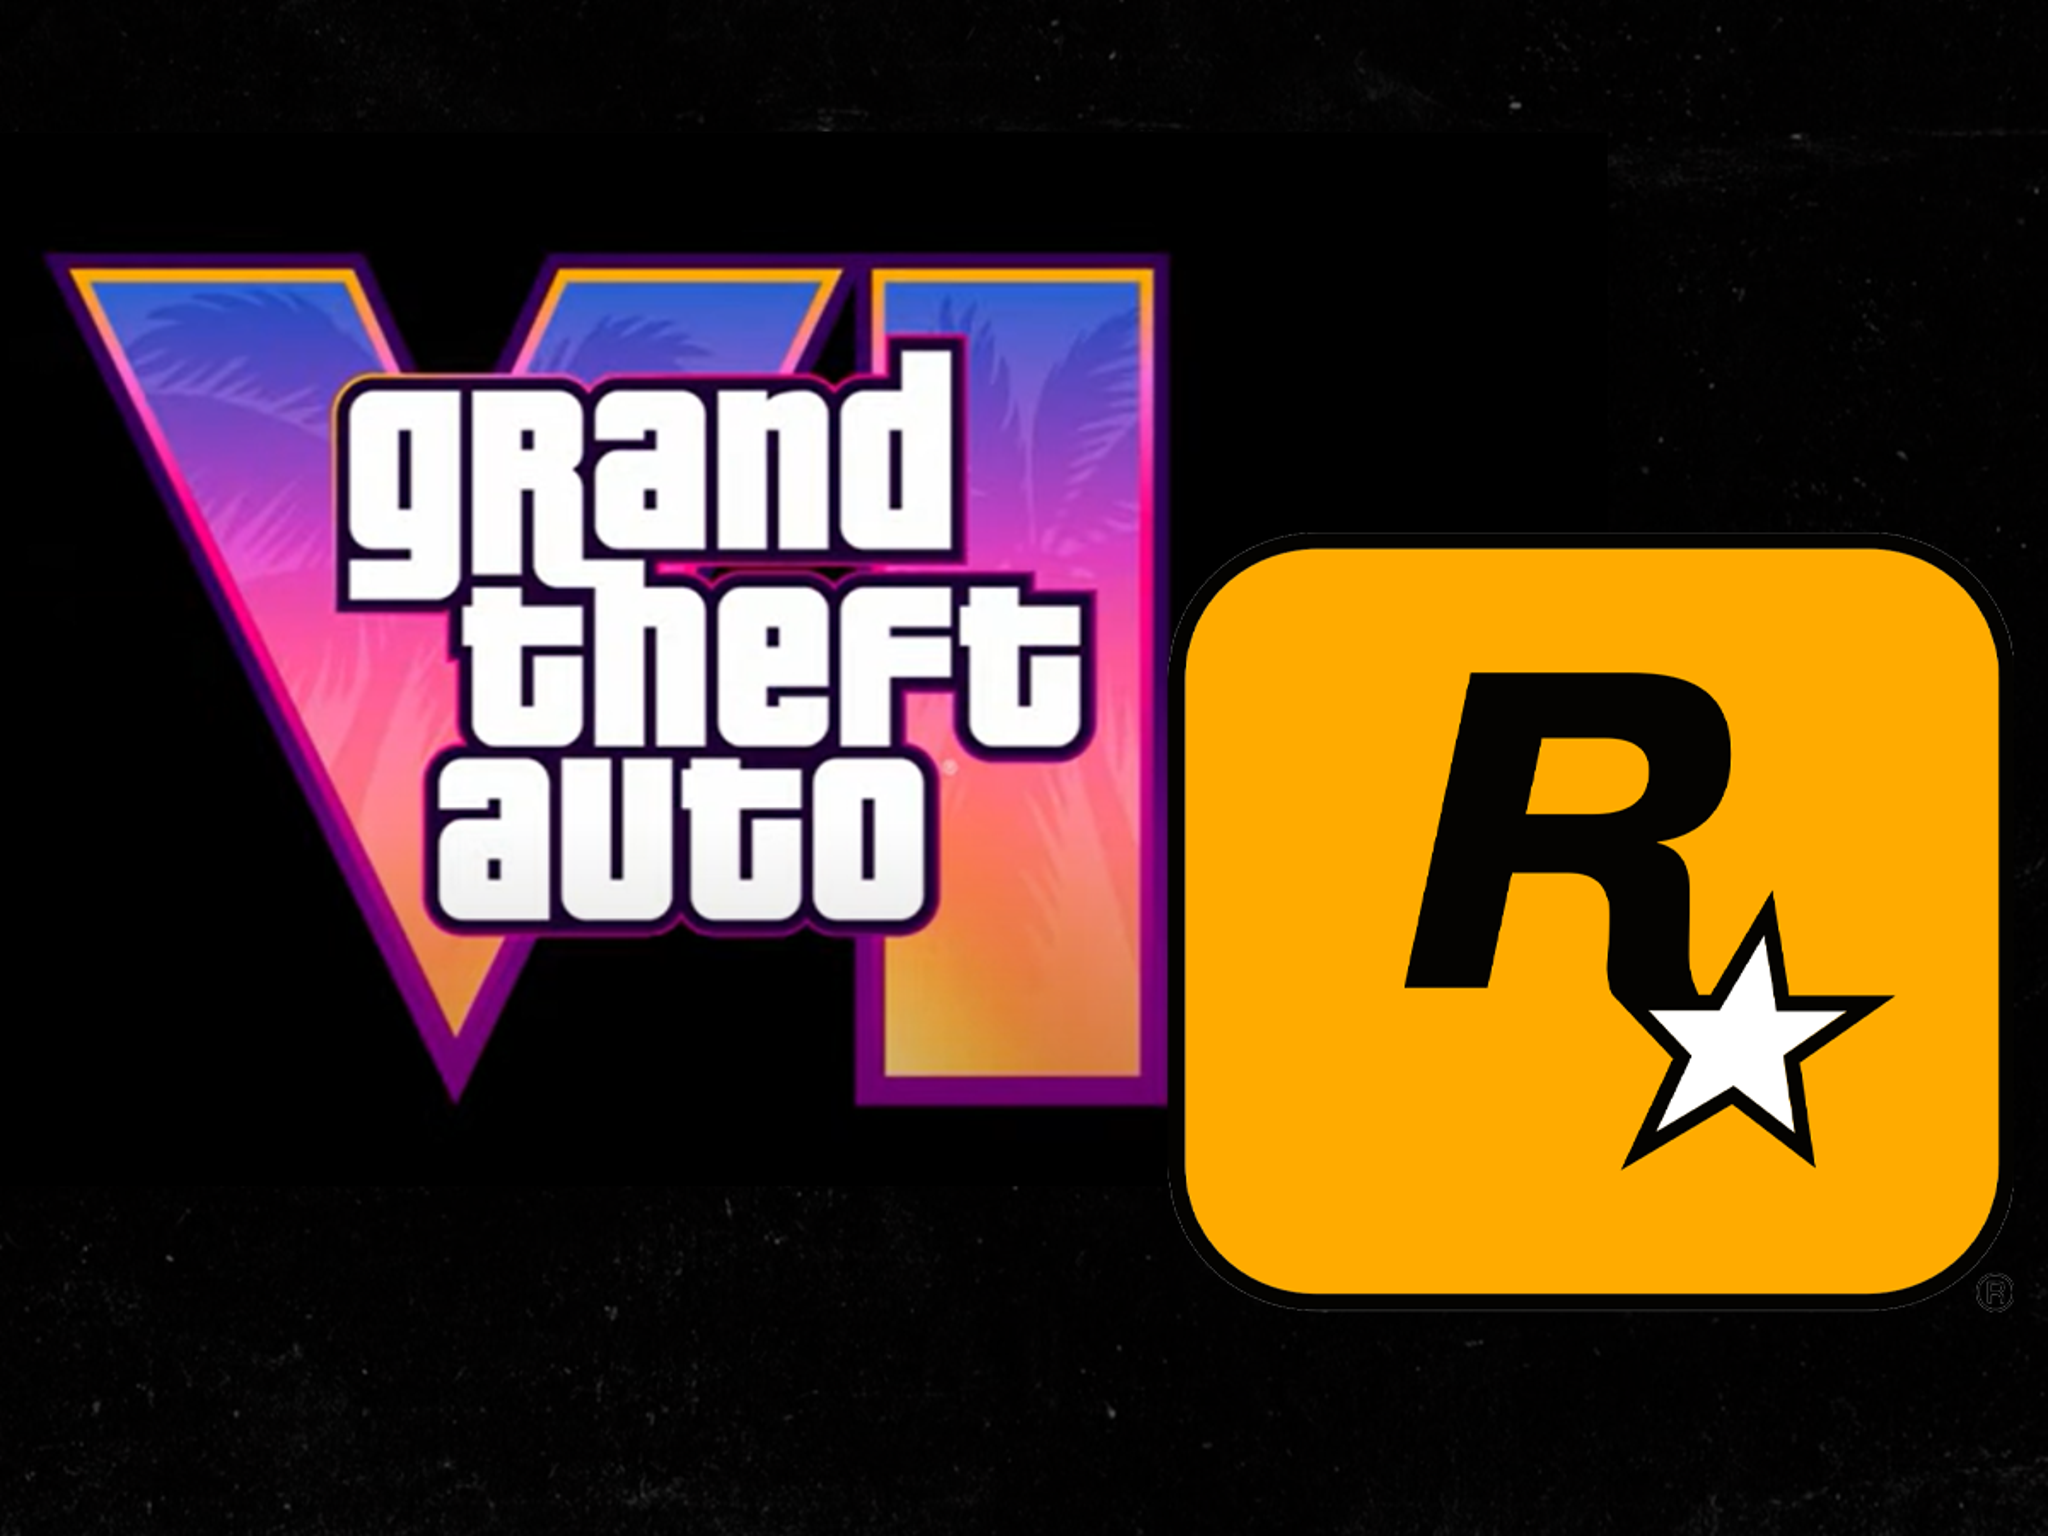 GTA VI footage appears to have leaked online - Grand Theft Auto VI